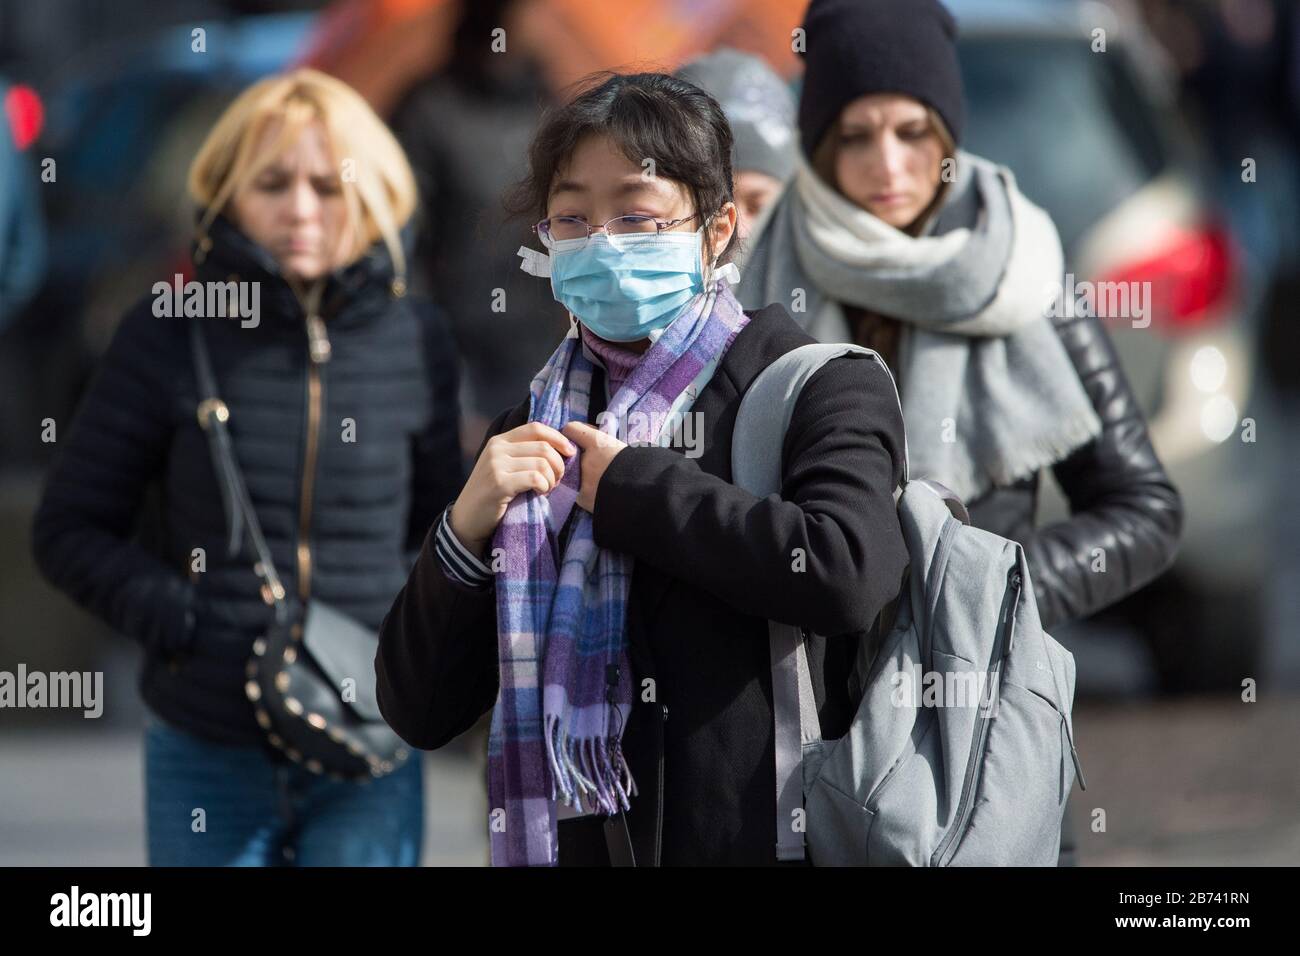 Edinburgh, UK. 13th Mar, 2020. Pictured: People seen wearing masks and covering their nose and mouth with scarves due to the Coronavirus pandemic. Credit: Colin Fisher/Alamy Live News Stock Photo